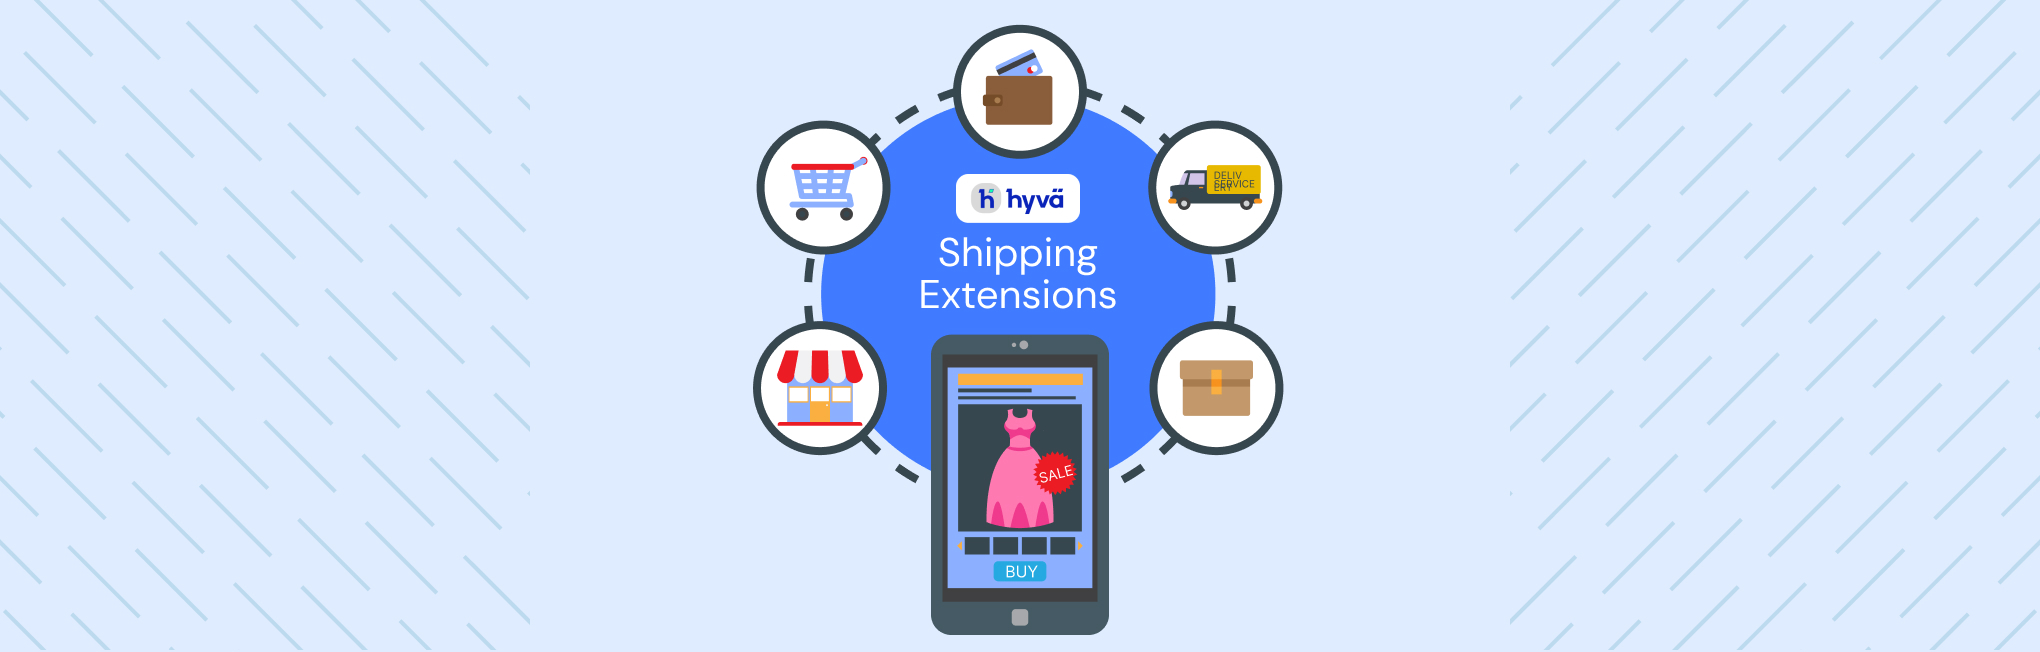 Hyvä-Compatible Shipping Extensions For Magento 2